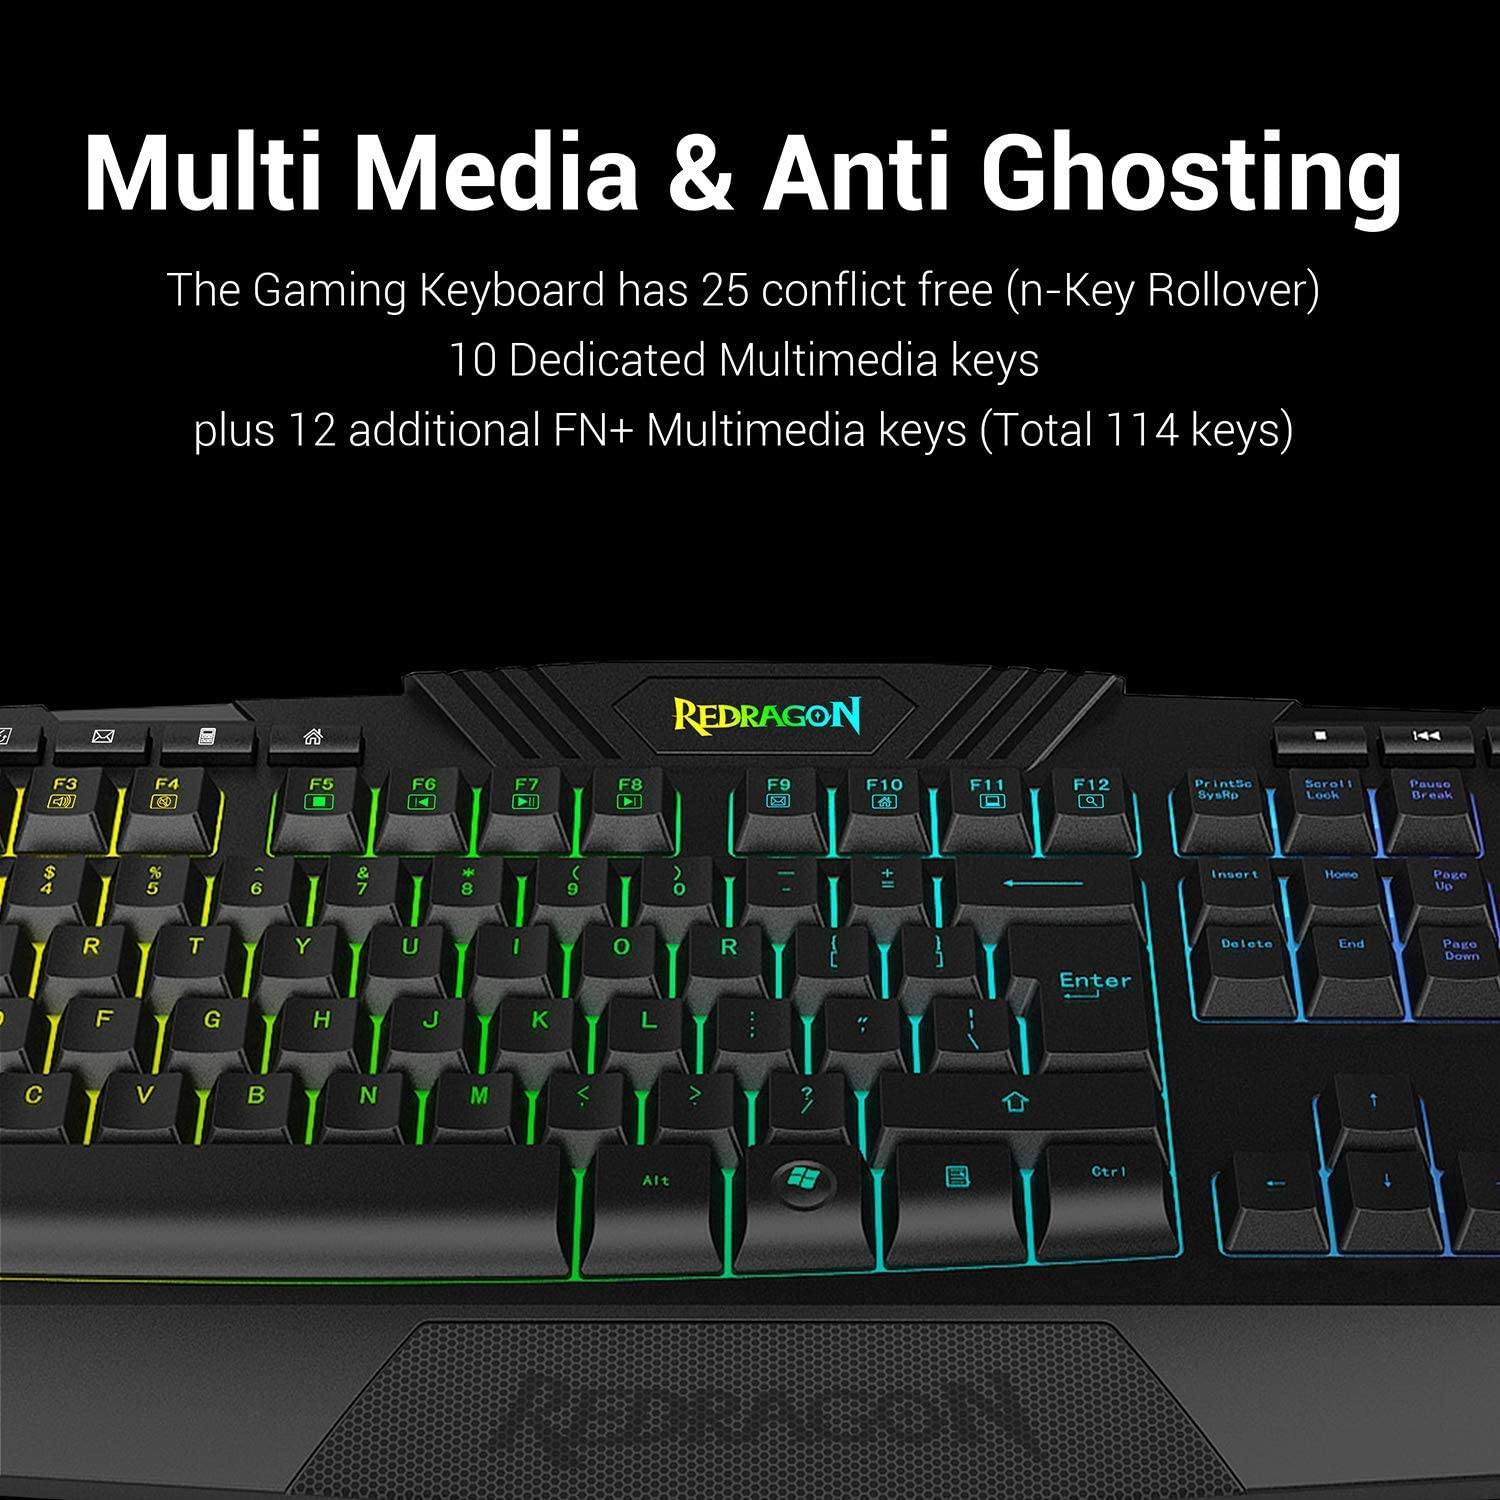 Redragon S101 Wired Gaming Keyboard and Mouse Combo RGB Backlit Gaming Keyboard with Multimedia Keys Wrist Rest and Red Backlit Gaming Mouse 3200 DPI for Windows PC Gamers (Black) Redragon 